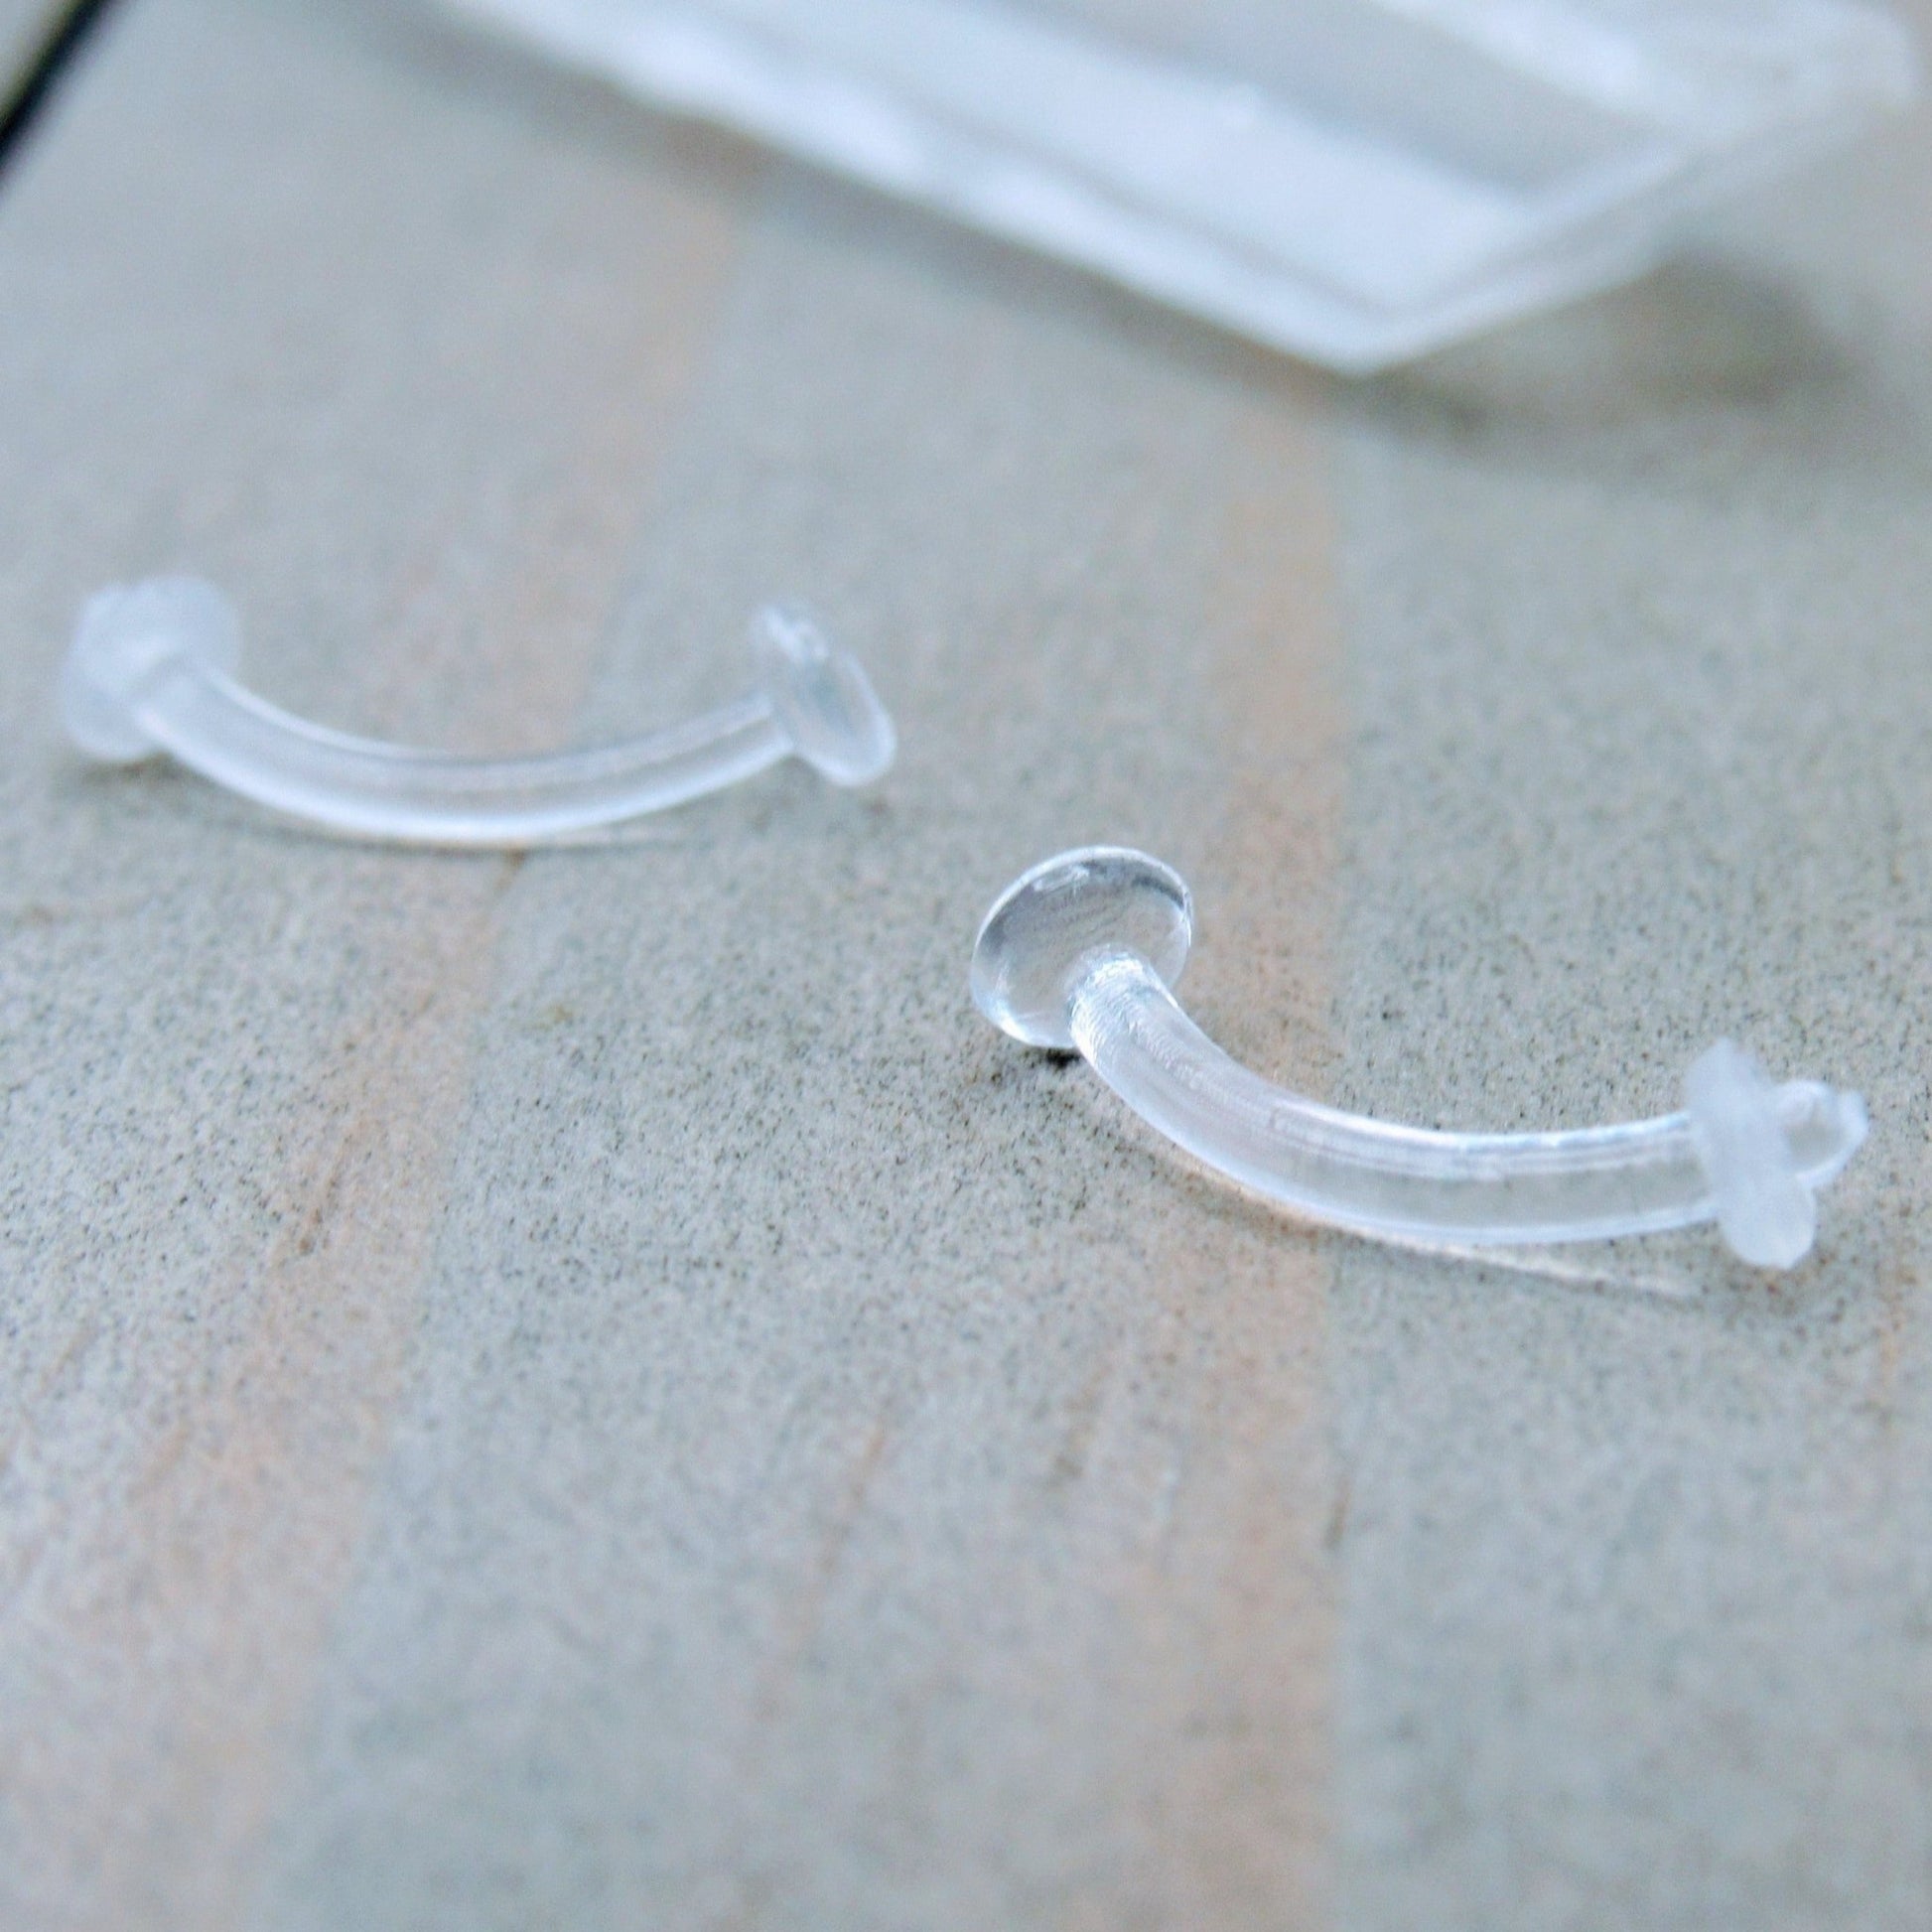 16g clear curved barbell body piercing retainer earring bar